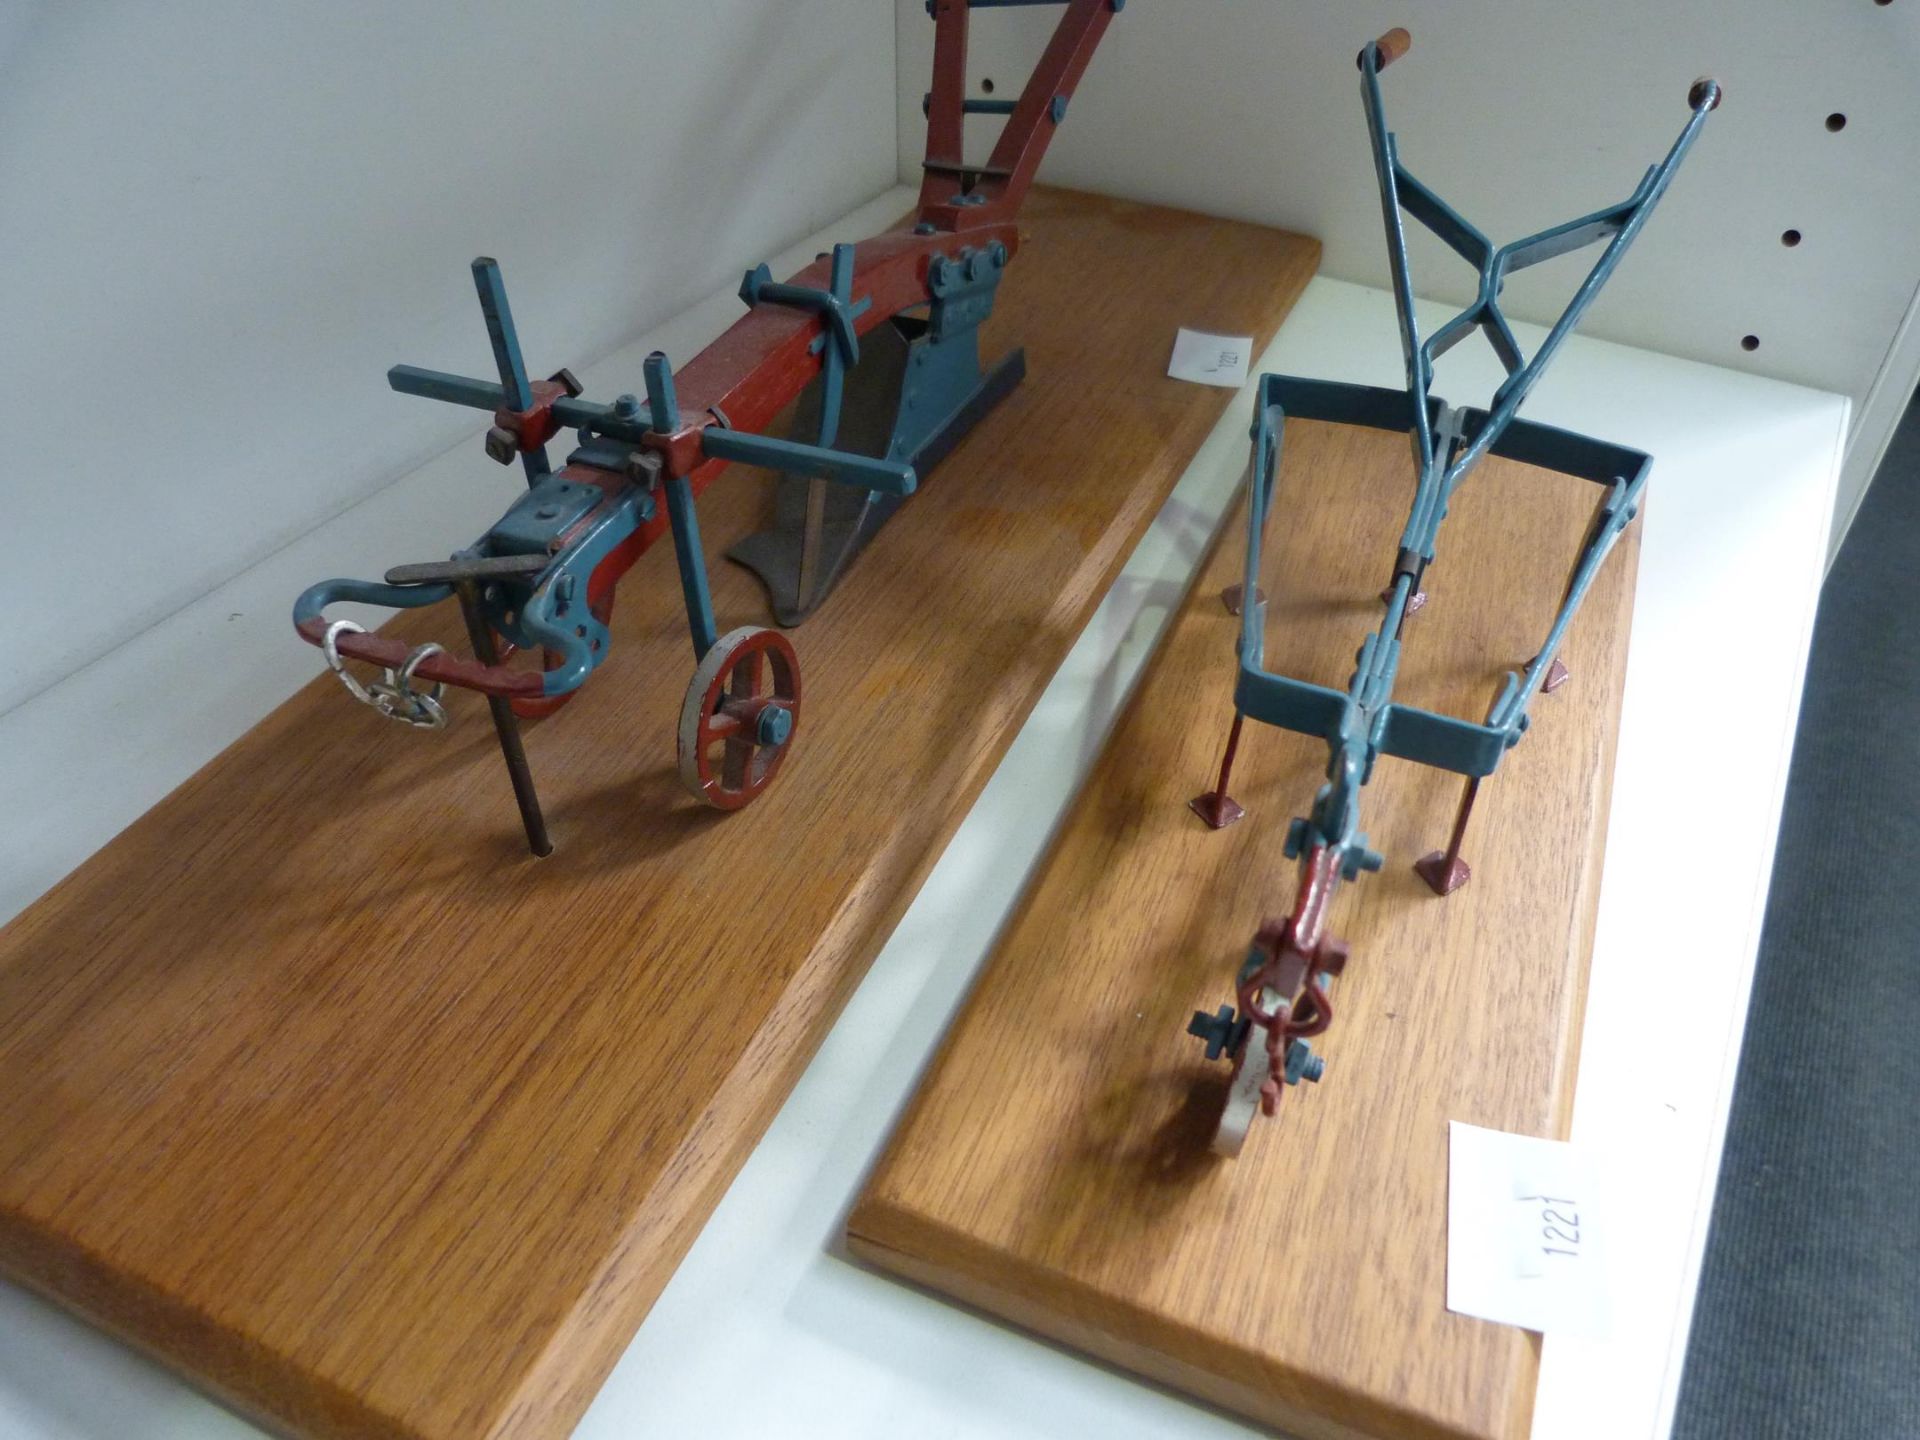 Three Metal Craft Early Ploughs, two mounted on bases (3) (est £20-£40) - Image 8 of 8